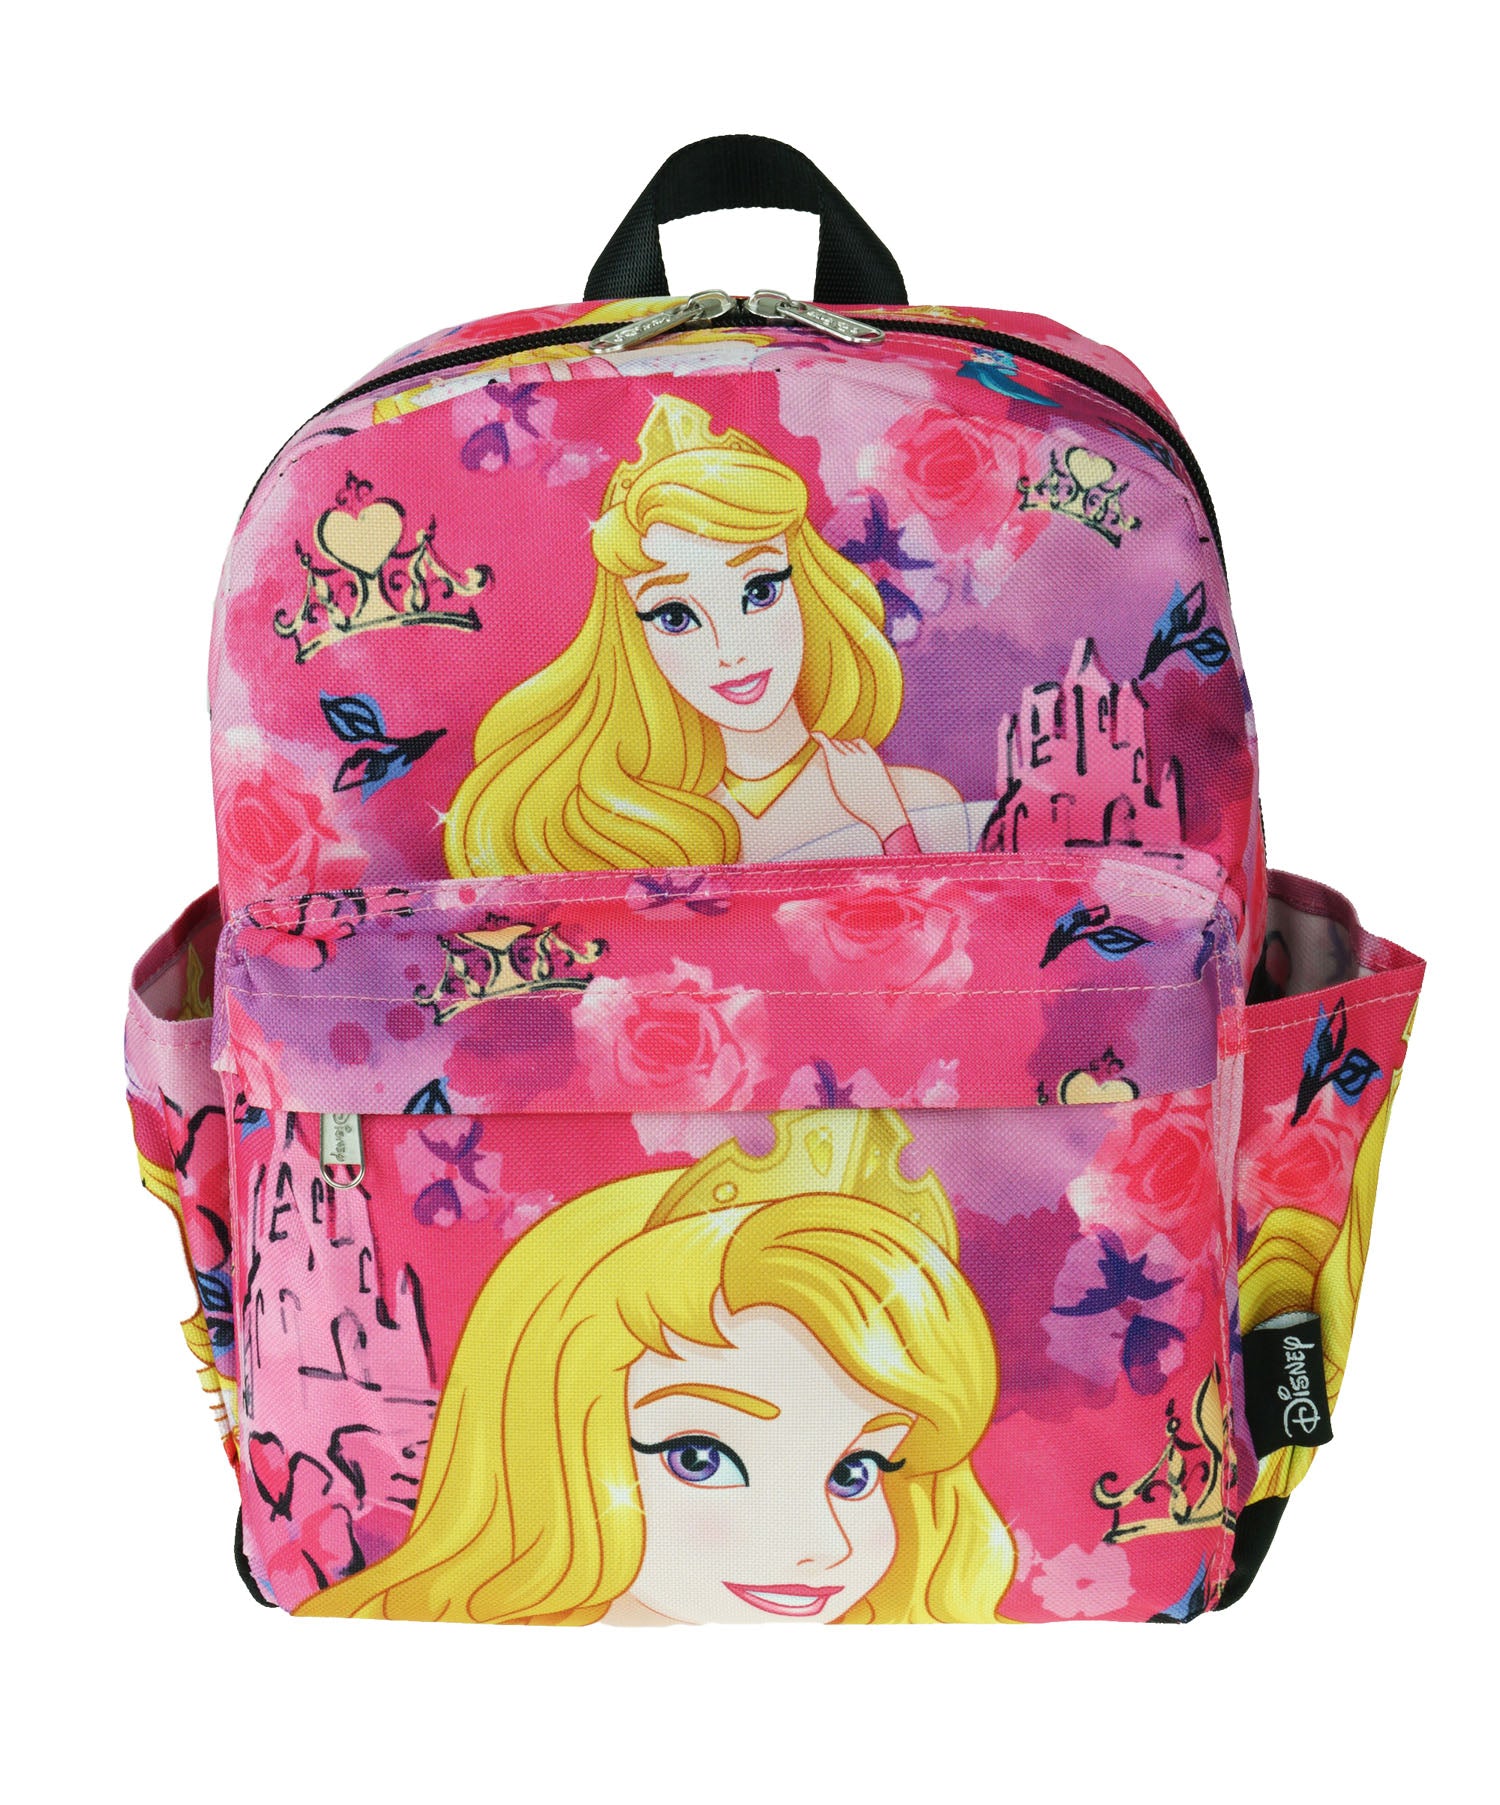 Sleeping Beauty Students Backpack Pretty Practical Cartoons Paint